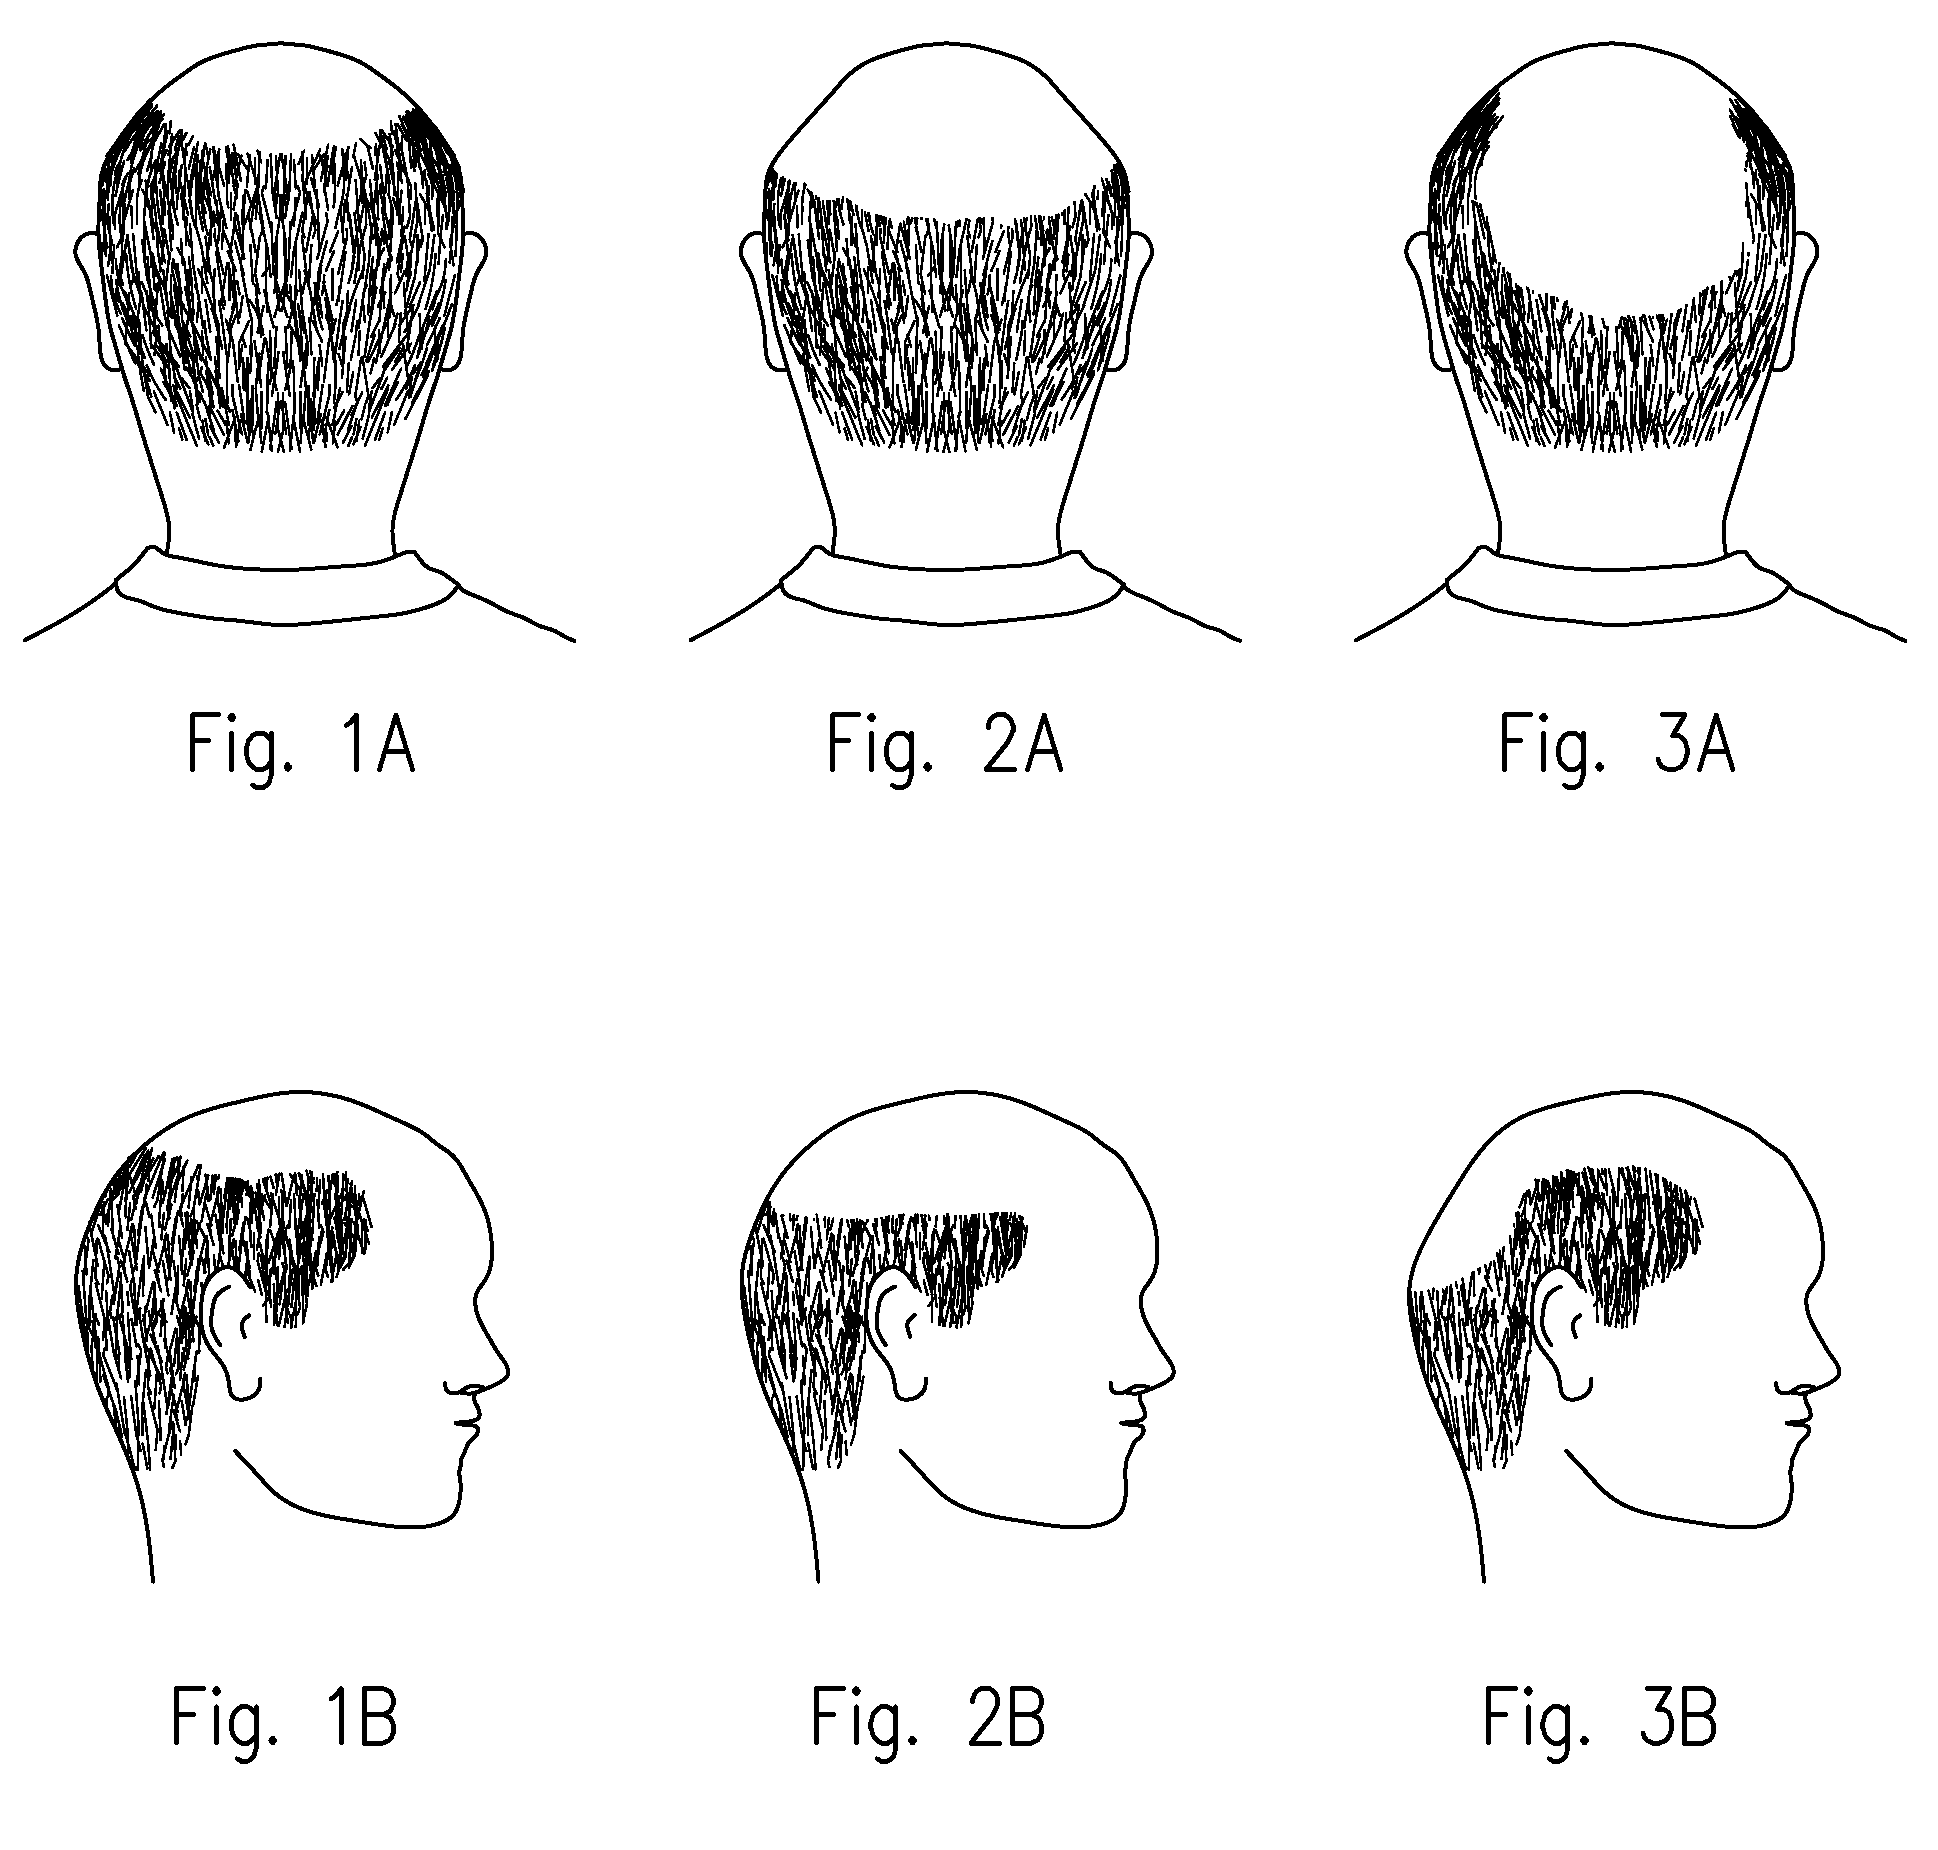 Method with apparatus to prevent baldness and stimulate hair growth